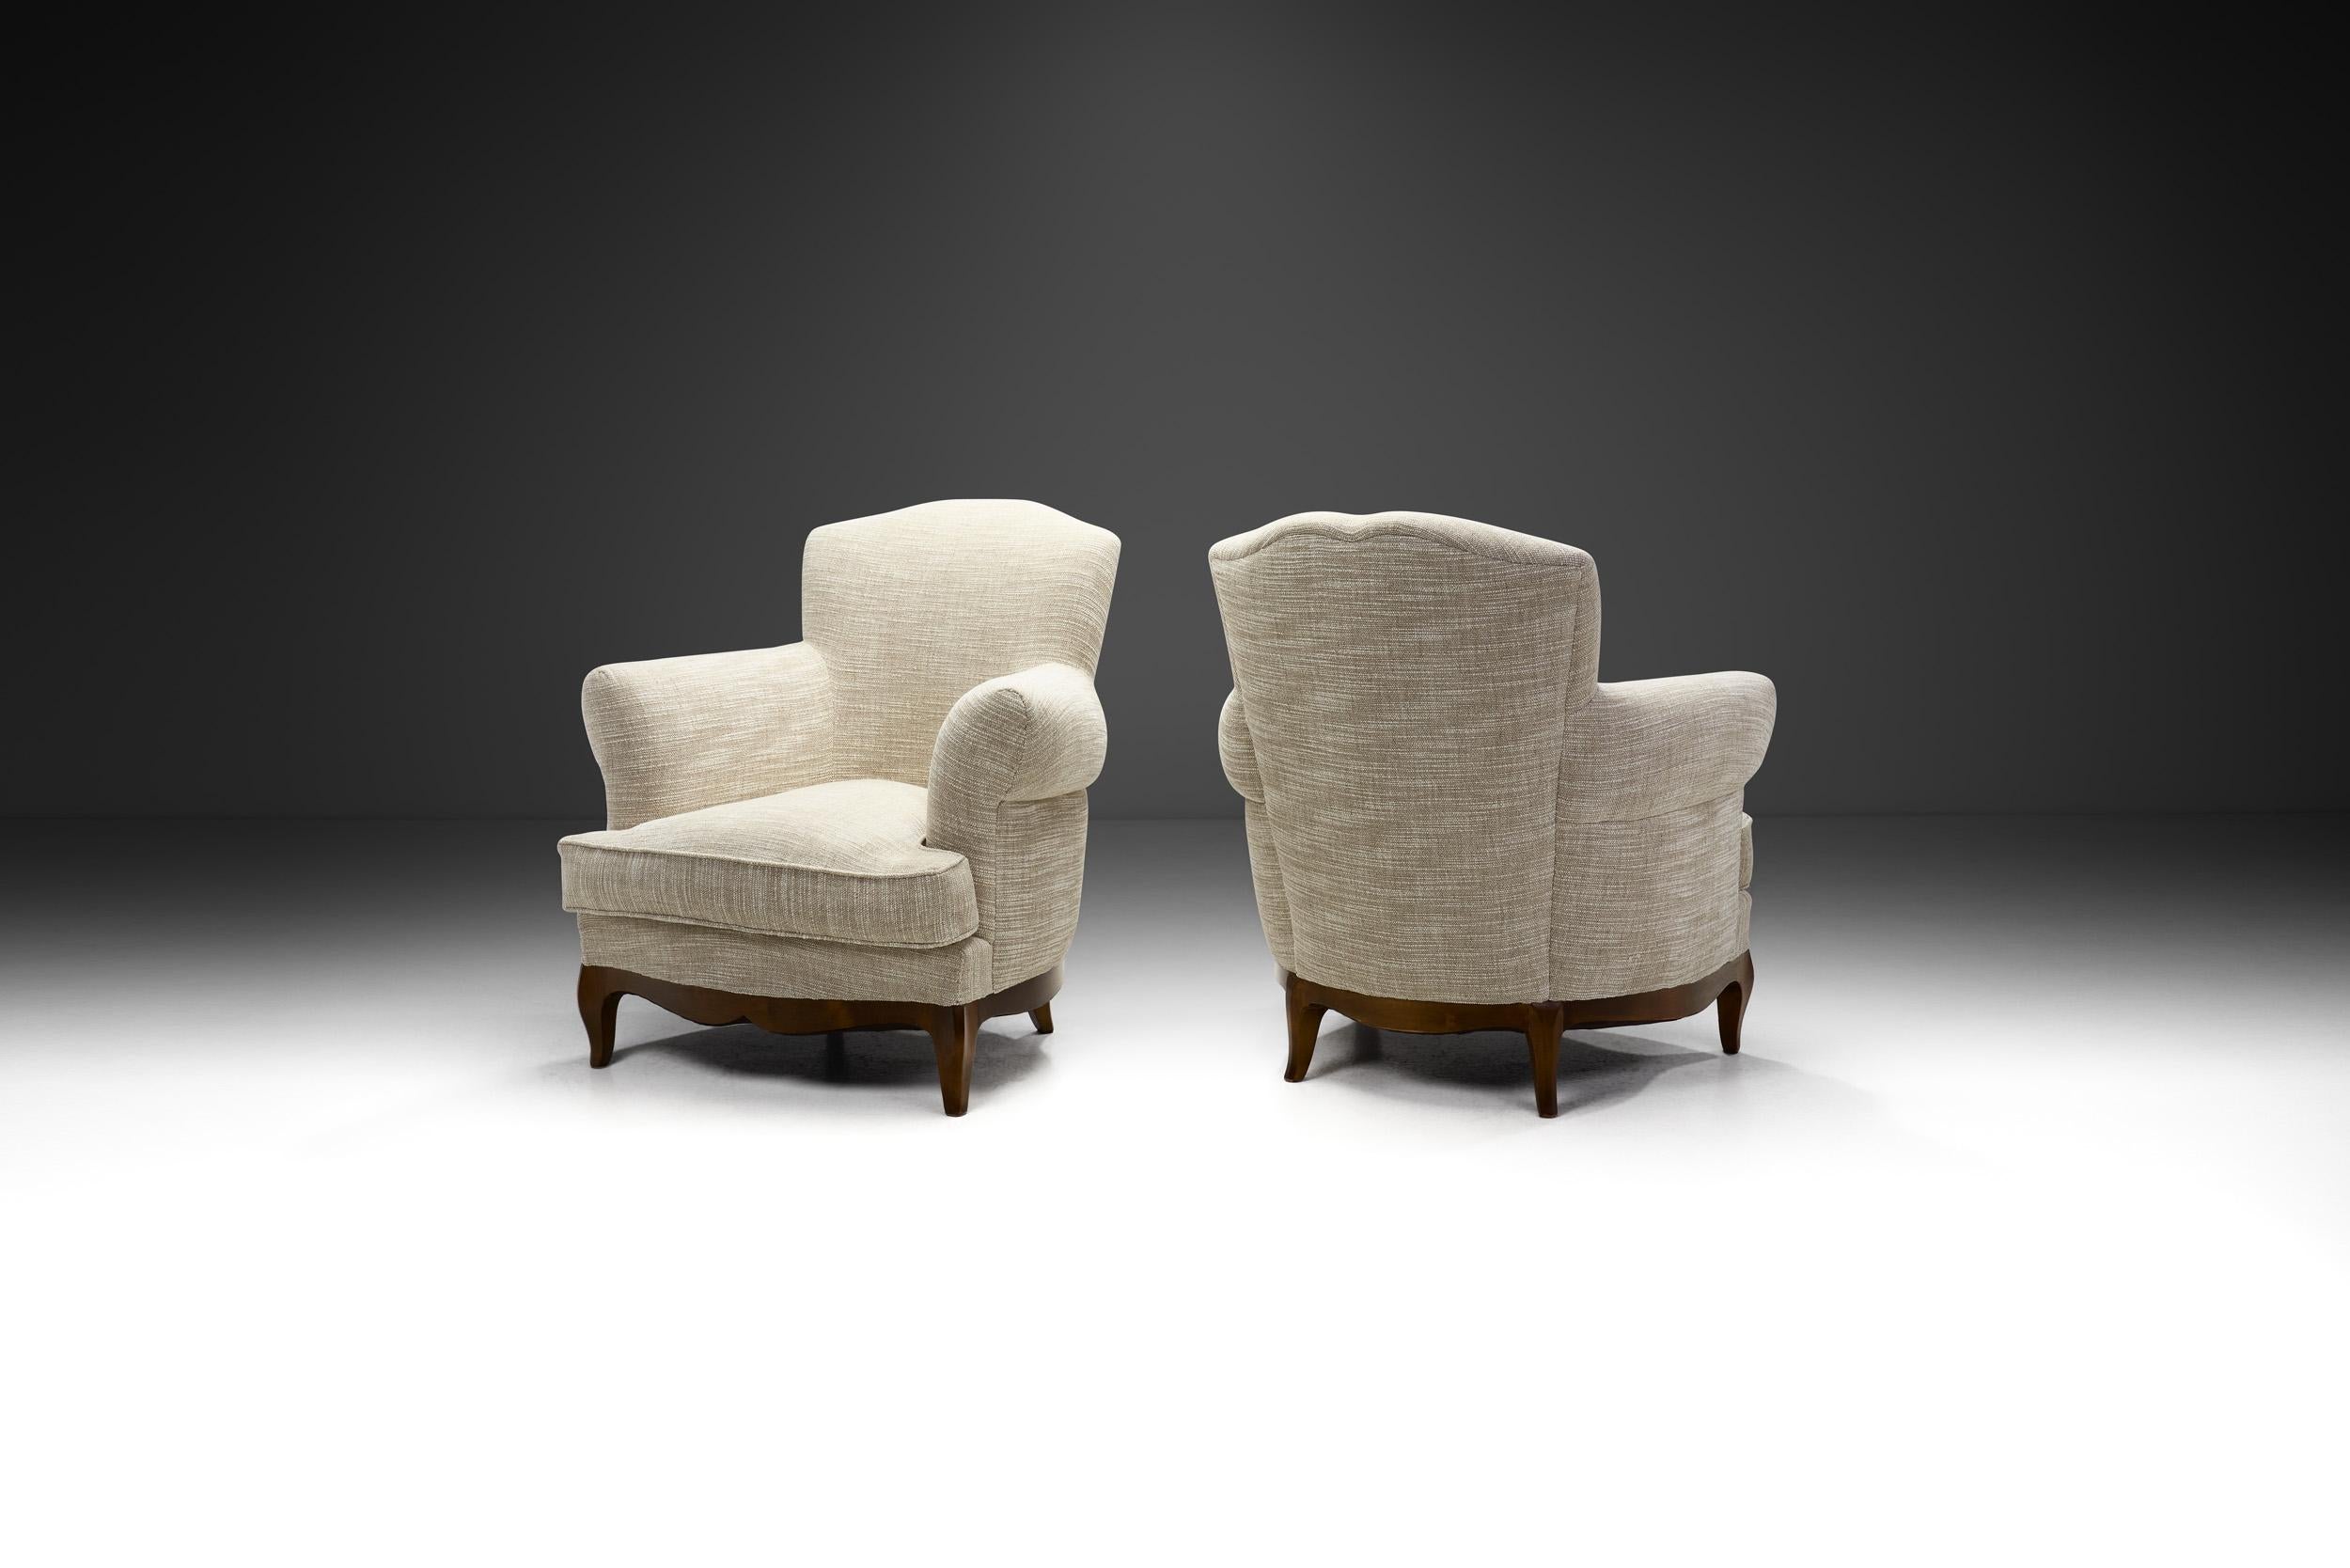 These unique, elegant lounge chairs take stylistic inspiration from both French period and Italian modern seating designs. The design incorporates beauty, functionality, and simplicity in a way that is characteristic of the mid 20th